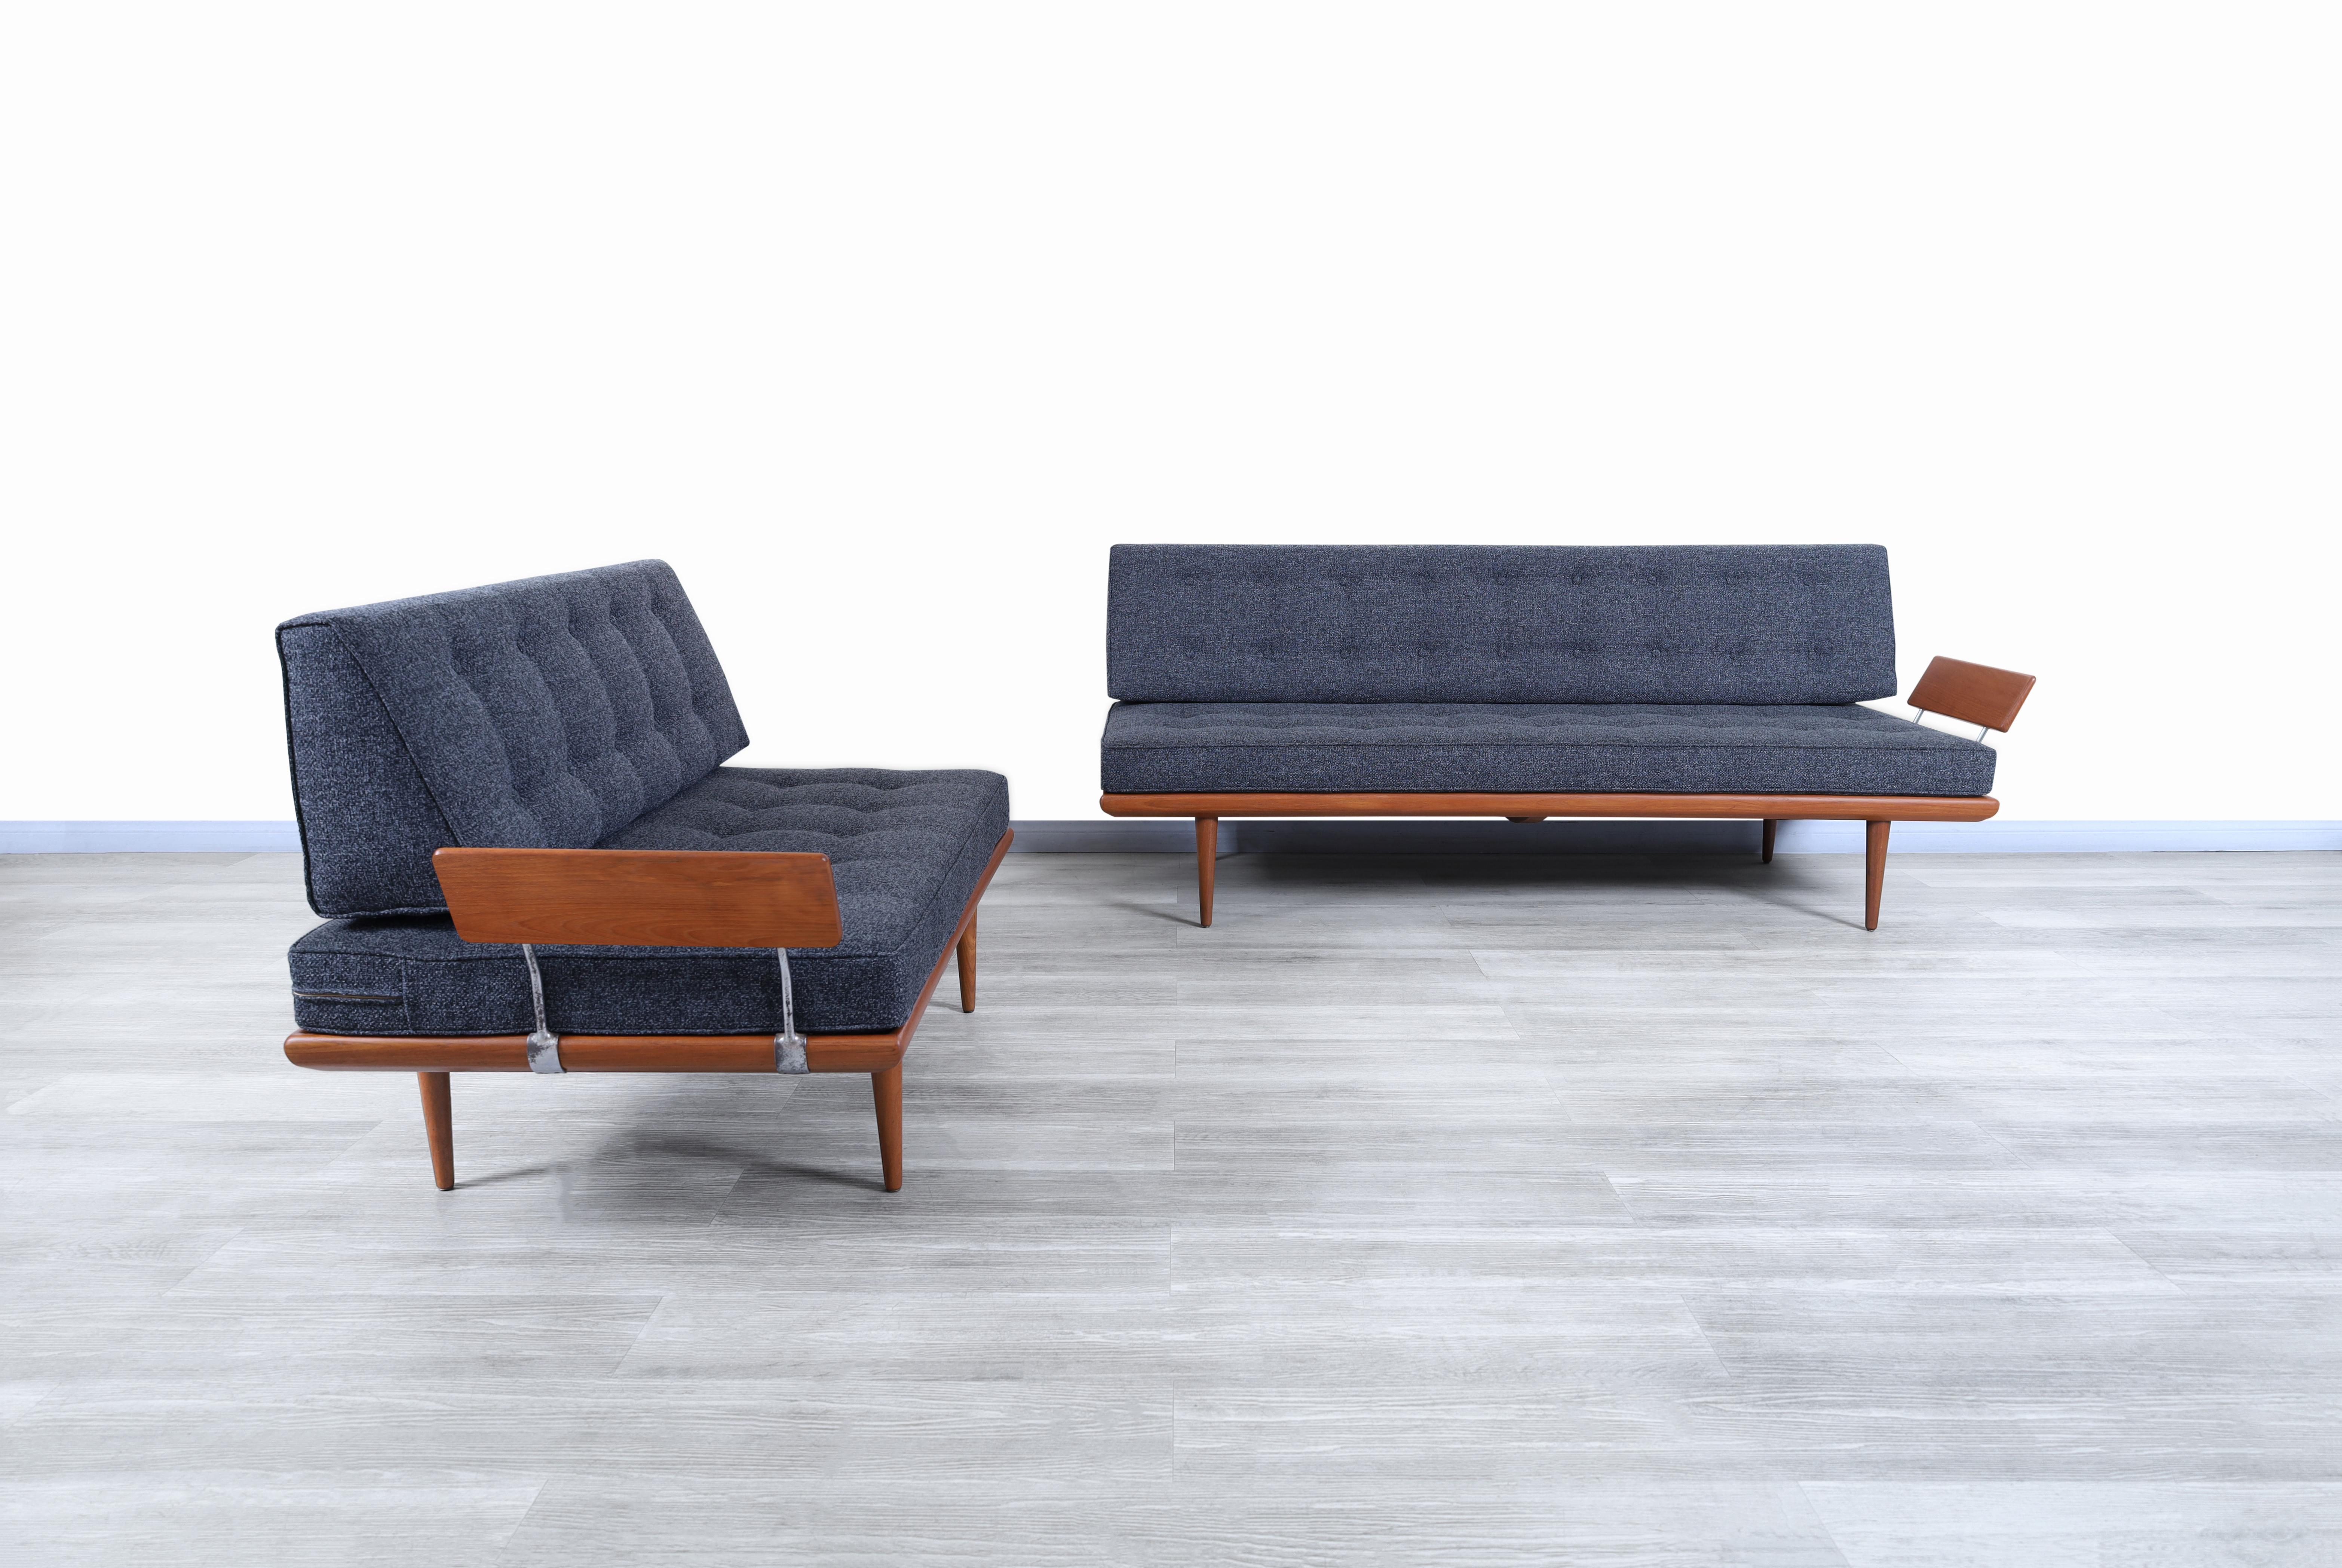 Fabulous Danish teak “Minerva” sectional sofa / daybed designed by Peter Hvidt & Orla Molgaard-Nielsen for France & Daverkosen in Denmark, circa 1950s. This set has an avant-garde design for the time it was built, but it is highly versatile in its